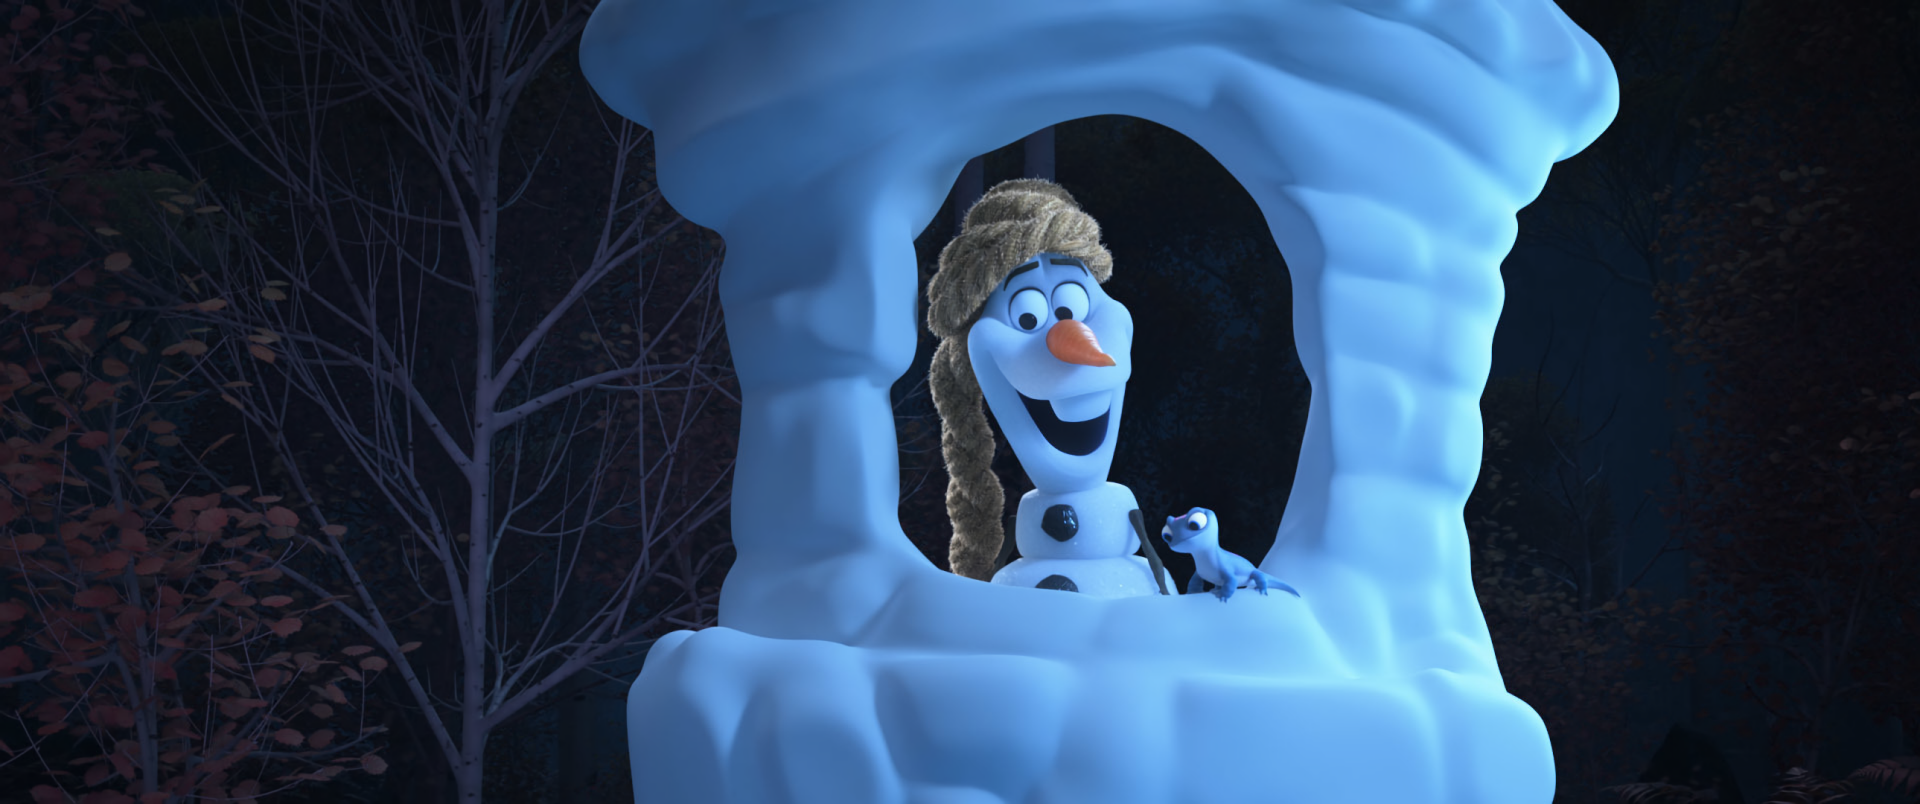 Olaf Presents Hd Wallpaper Background Image 2579x1080